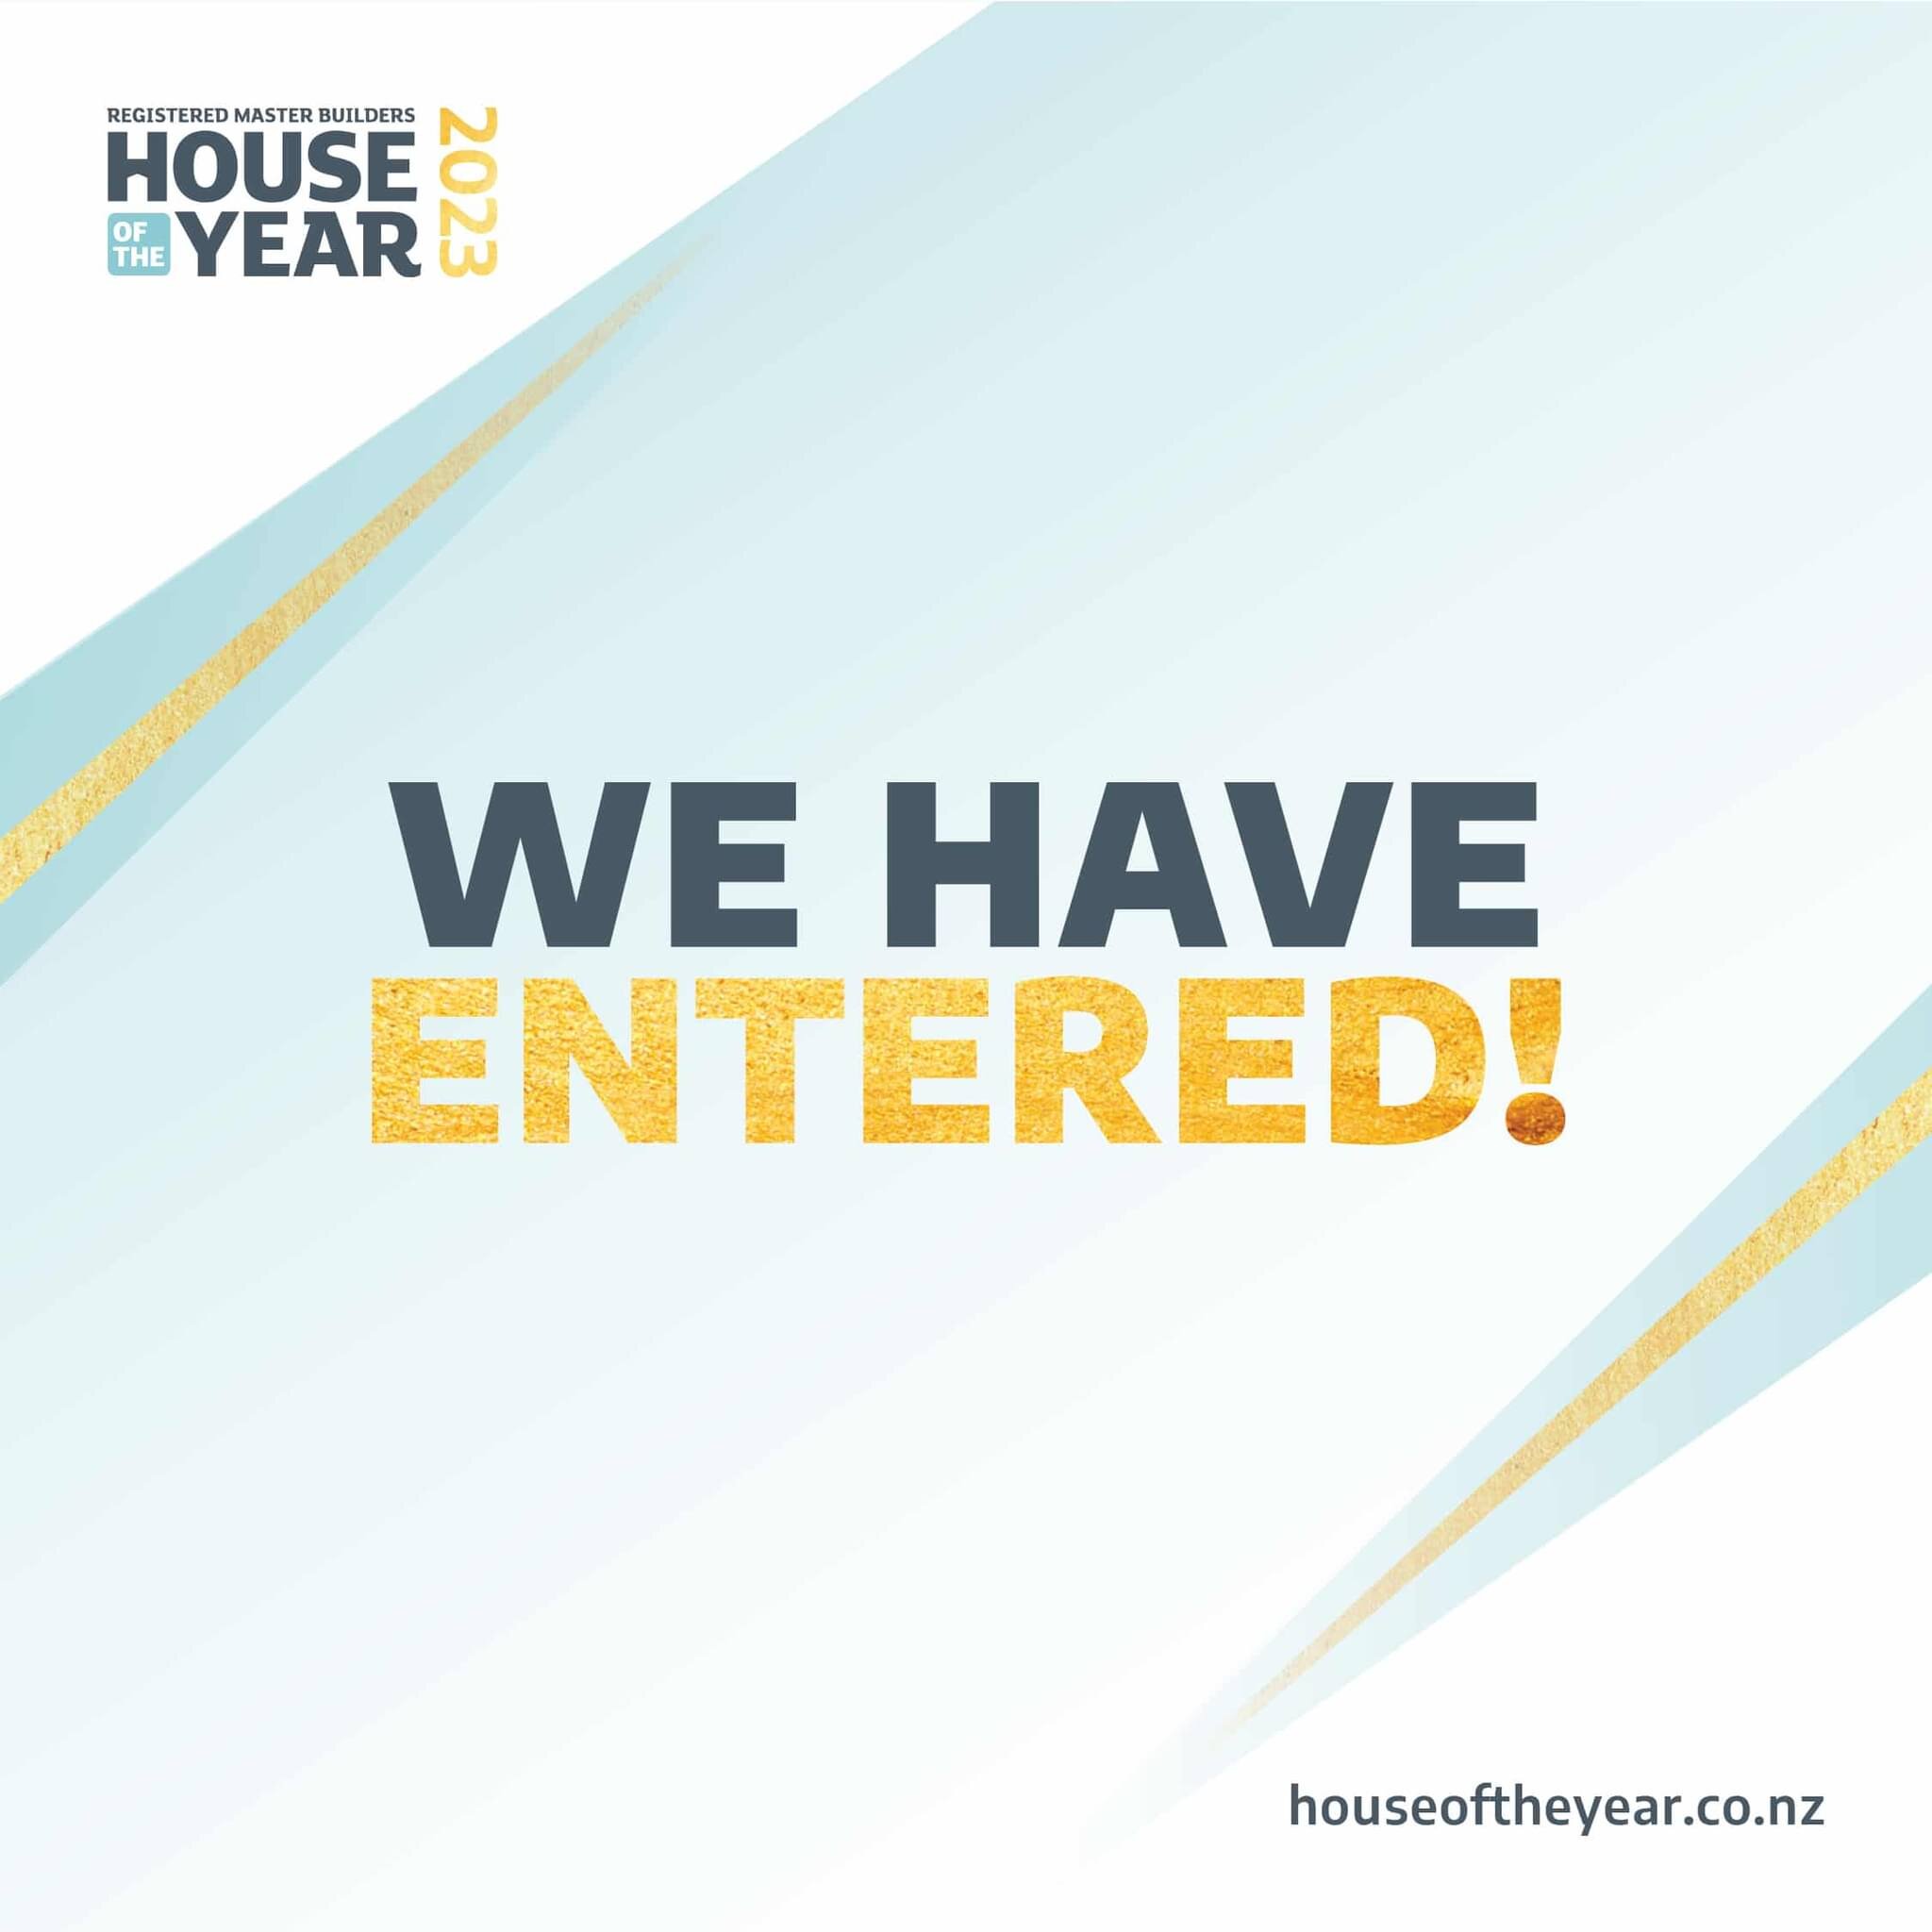 We have entered and the judges are on their way!! The homes are looking stunning. Hopefully the judges love them as much as we do. Watch this space!!!

@Registered Master Builders Association 
#HouseoftheYear2023 
#nelsonnz